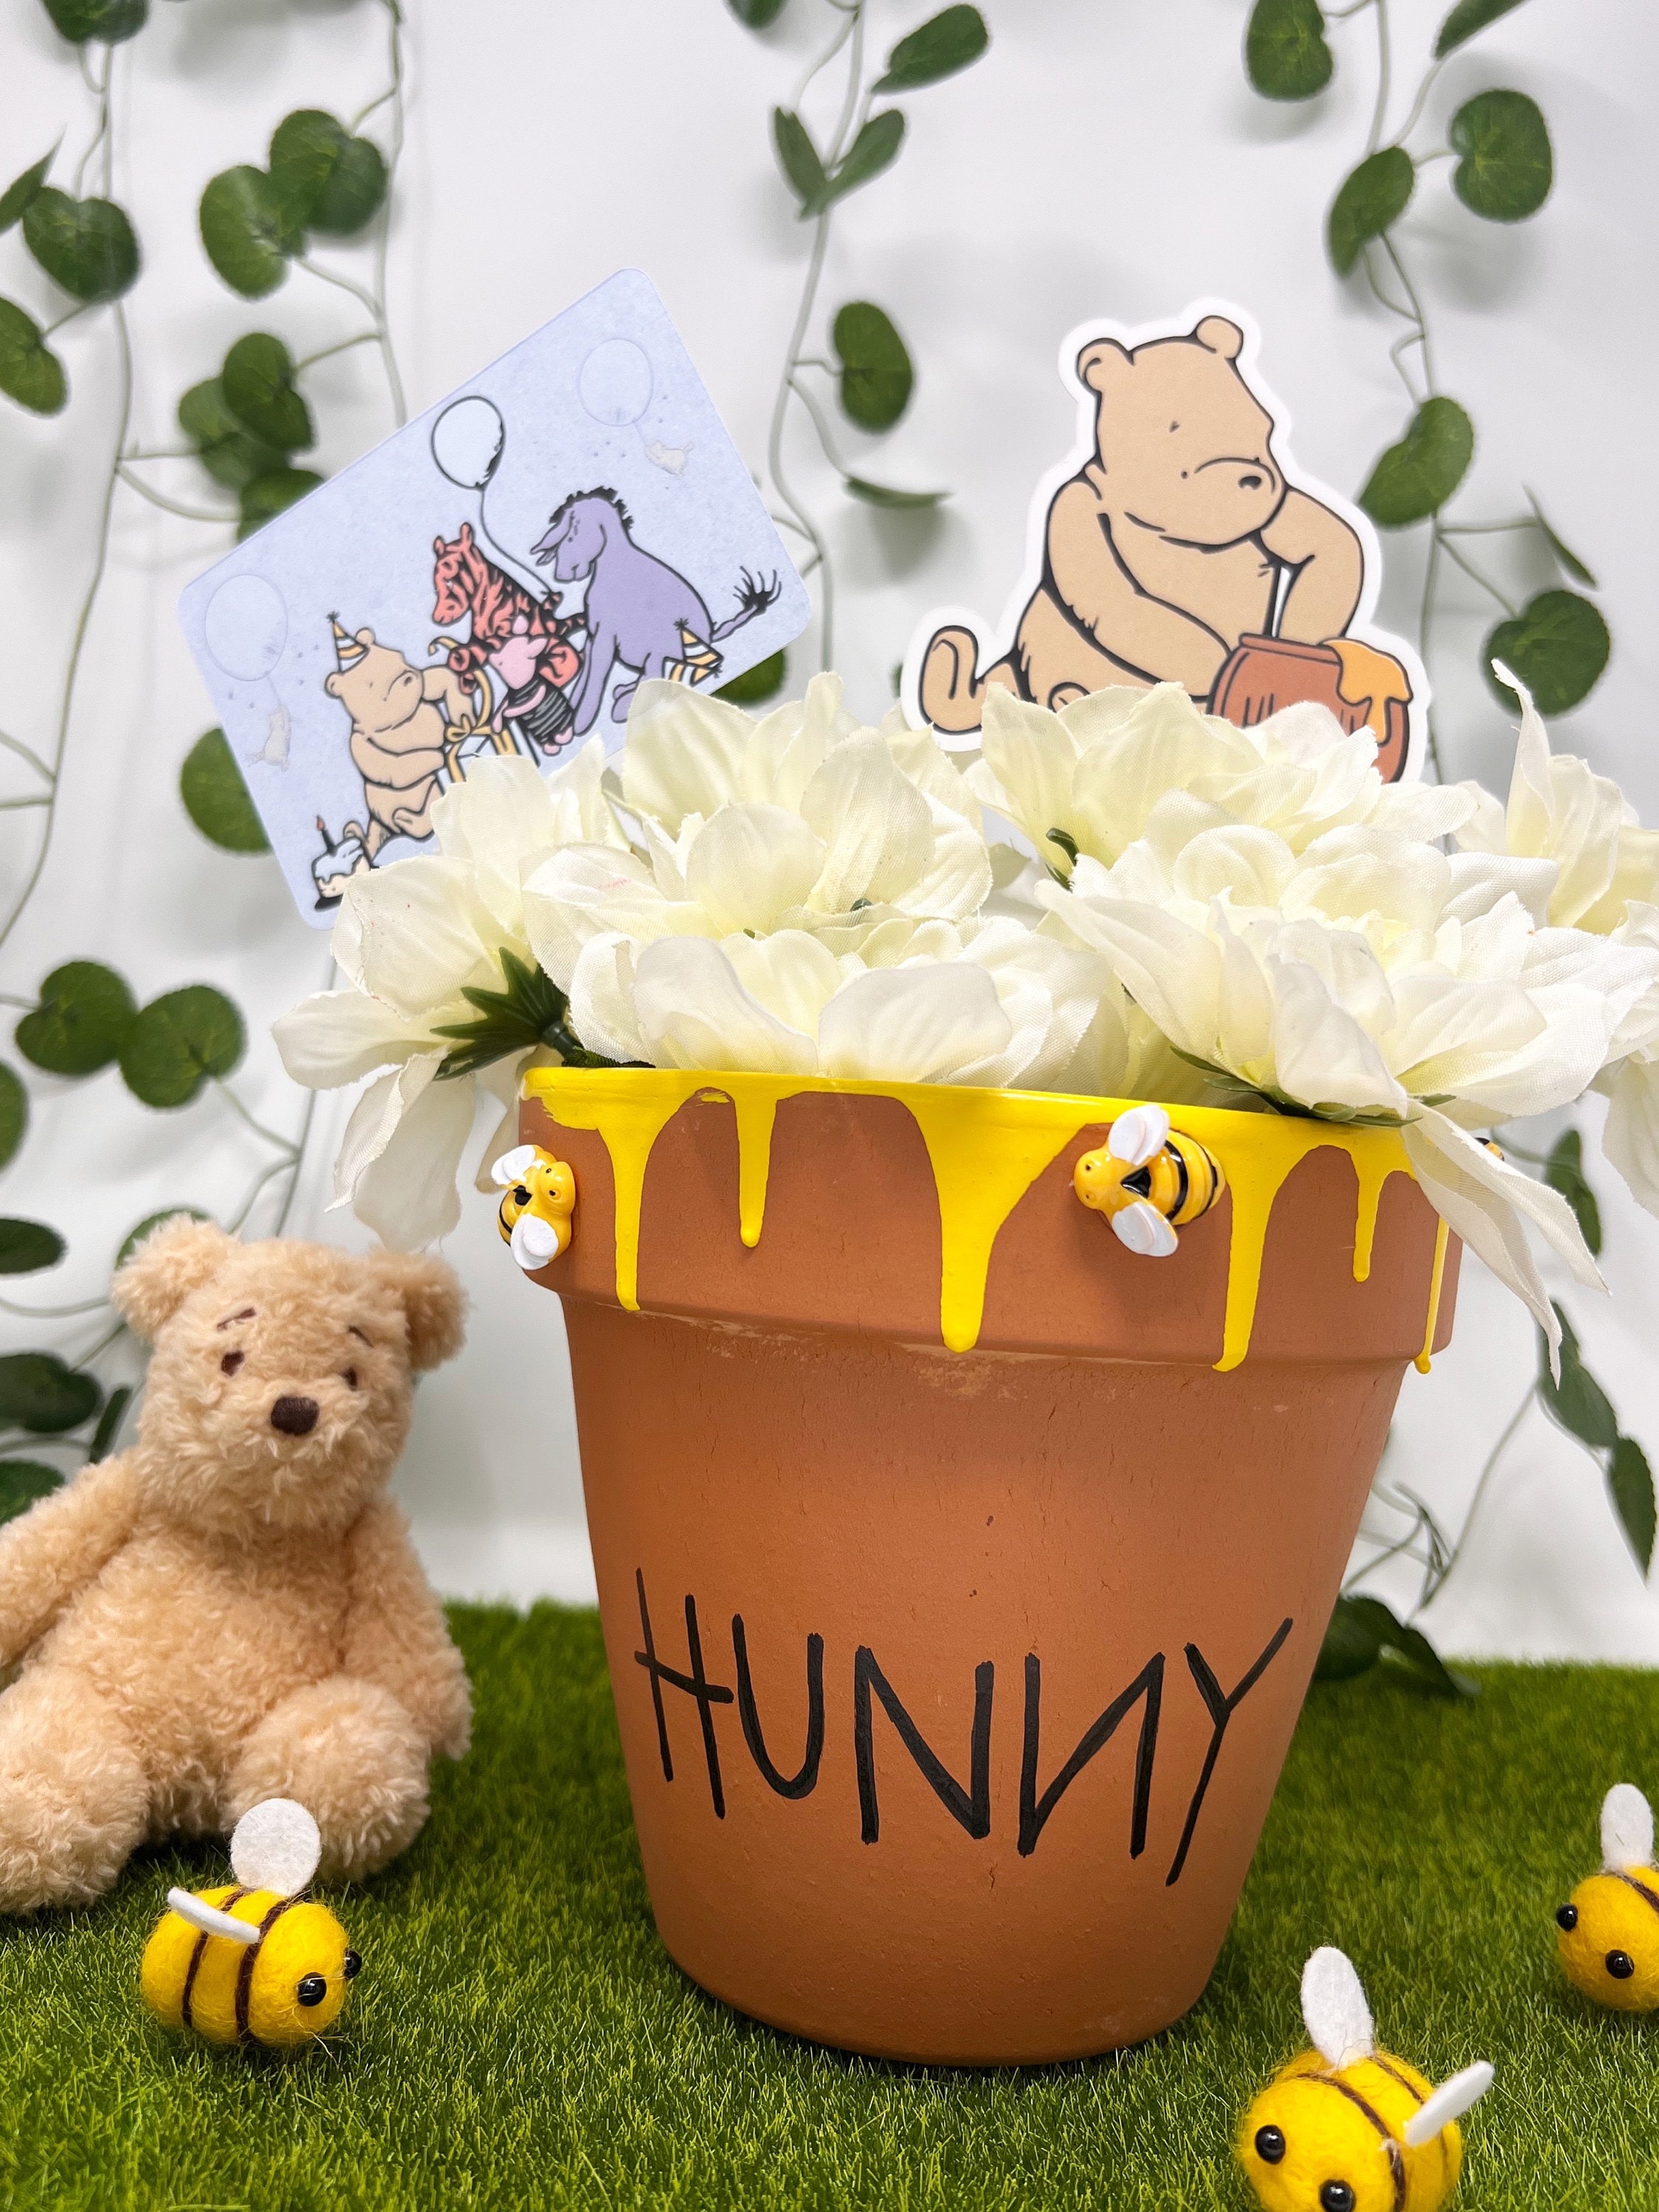 Winnie the Pooh Hunny Pots Centerpieces Party Favors for Birthdays, Baby  Showers, Mason Jar Centerpieces 